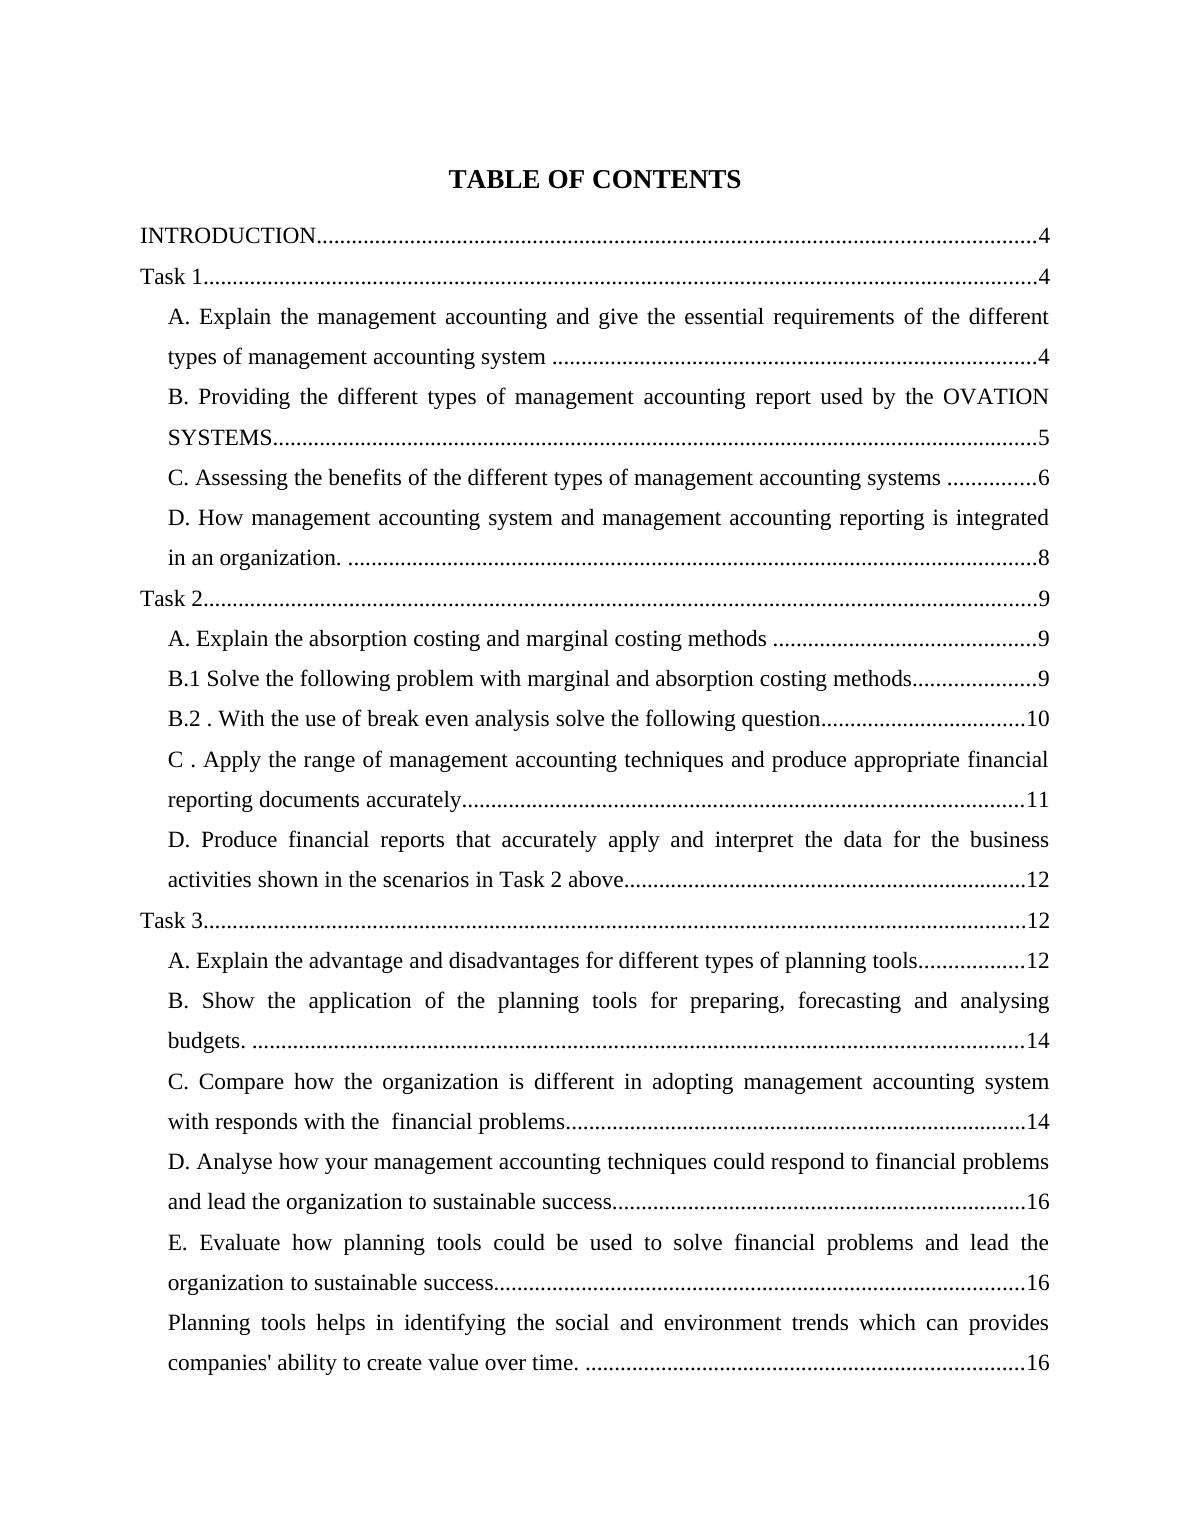 (Doc) Management Accounting Assignment - Solution_2